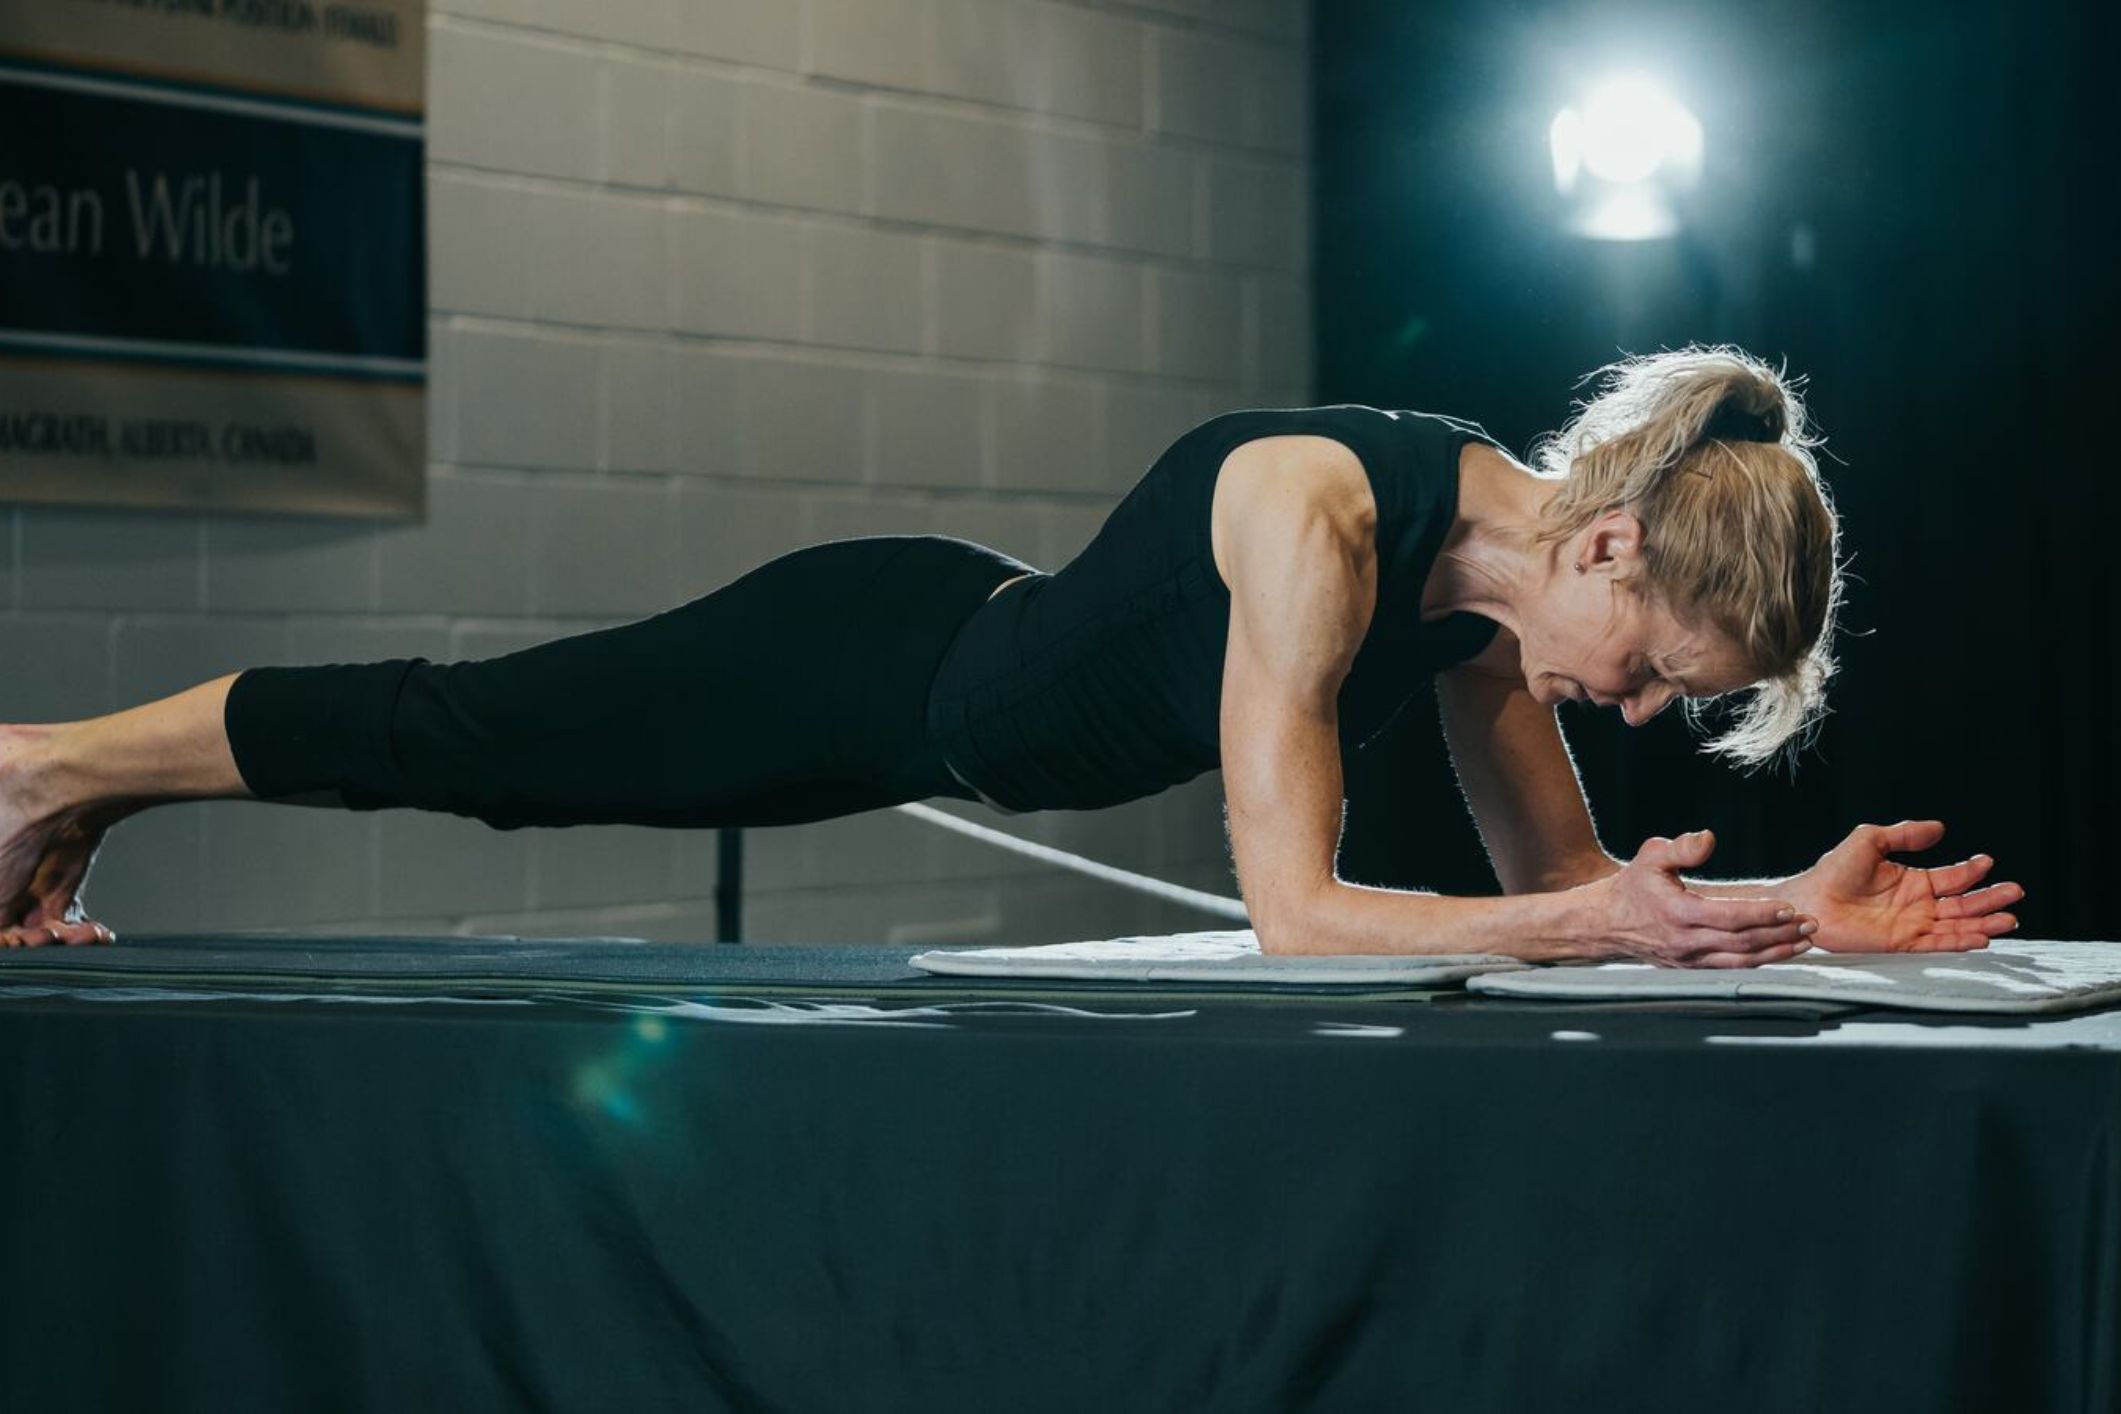 Grandmother Sets Guinness World Record with Incredible Abdominal Plank Feat